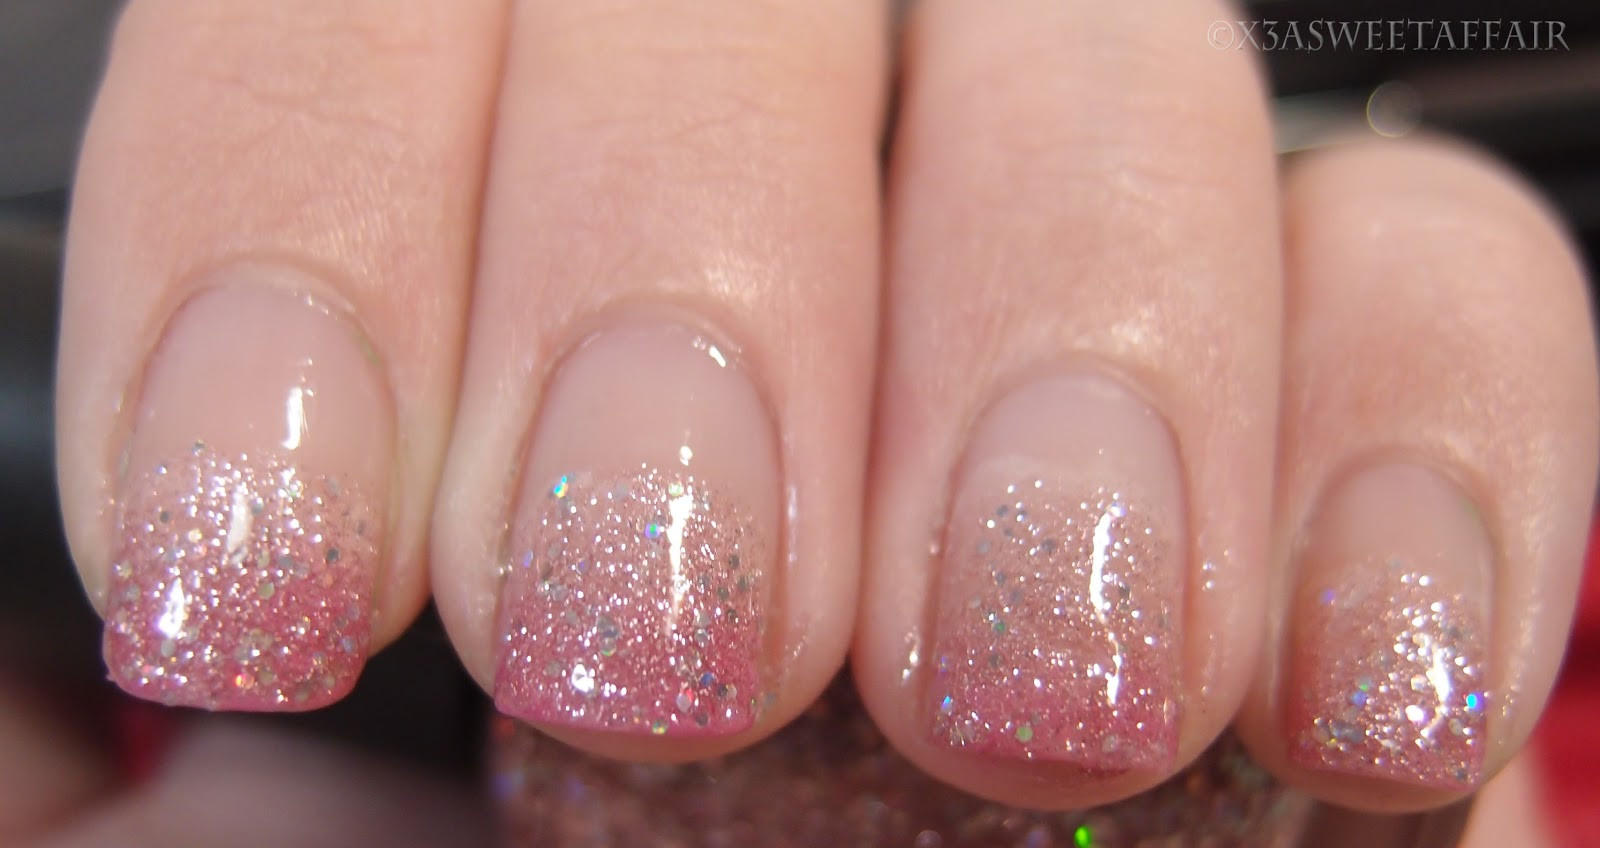 Ombre Nails With Glitter
 x3ASweetAffair Naturally Nails Pink ombre glitter